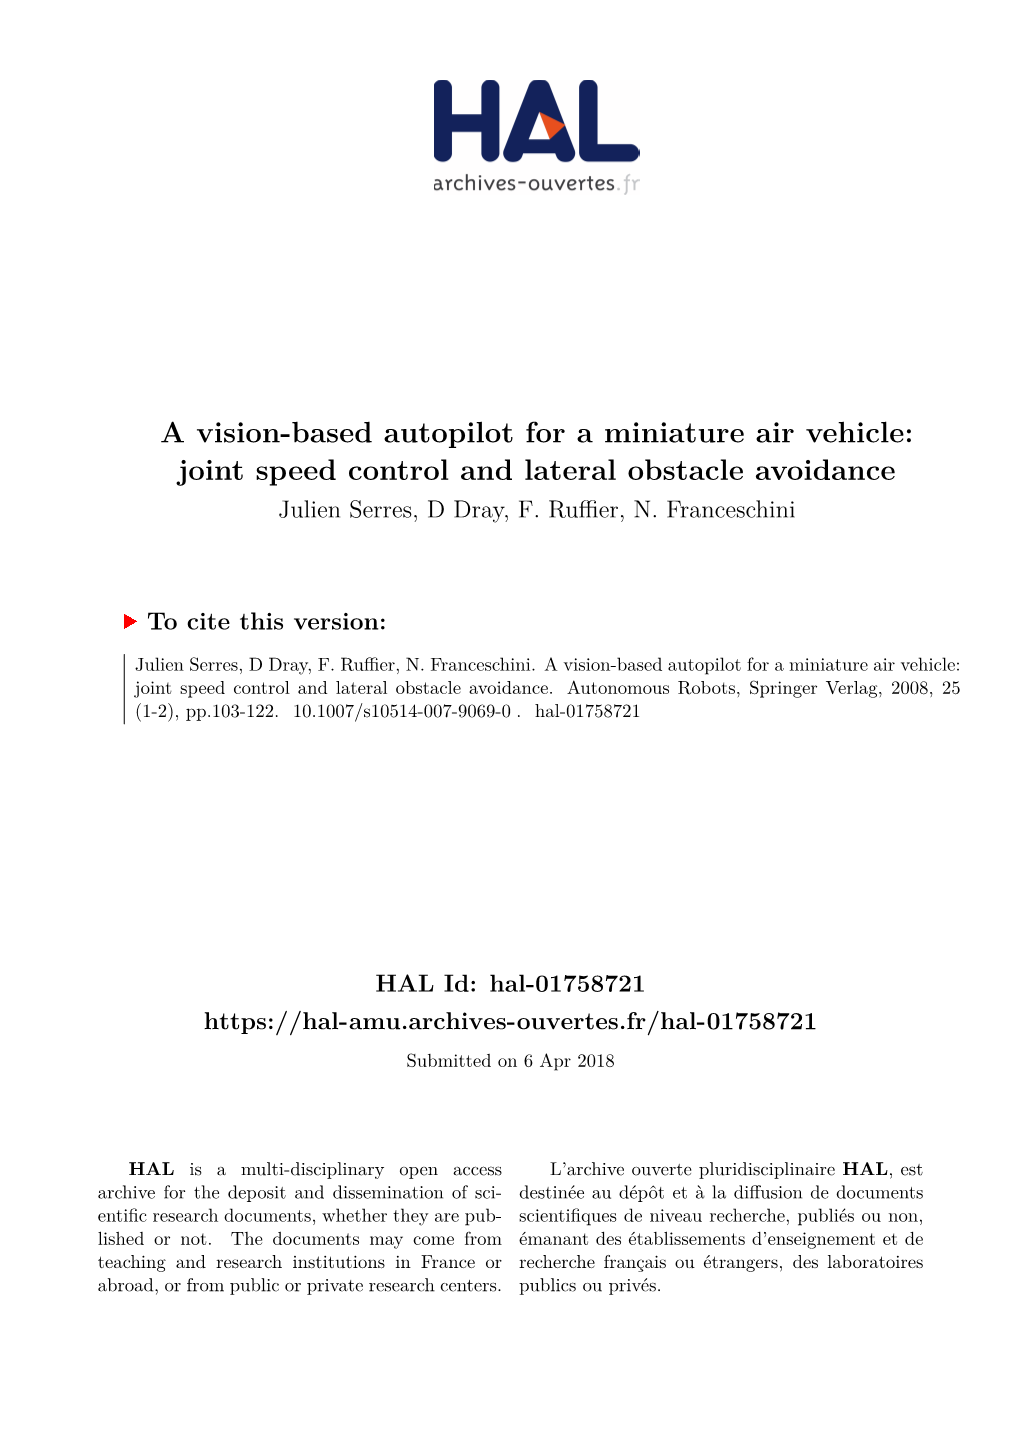 A Vision-Based Autopilot for a Miniature Air Vehicle: Joint Speed Control and Lateral Obstacle Avoidance Julien Serres, D Dray, F